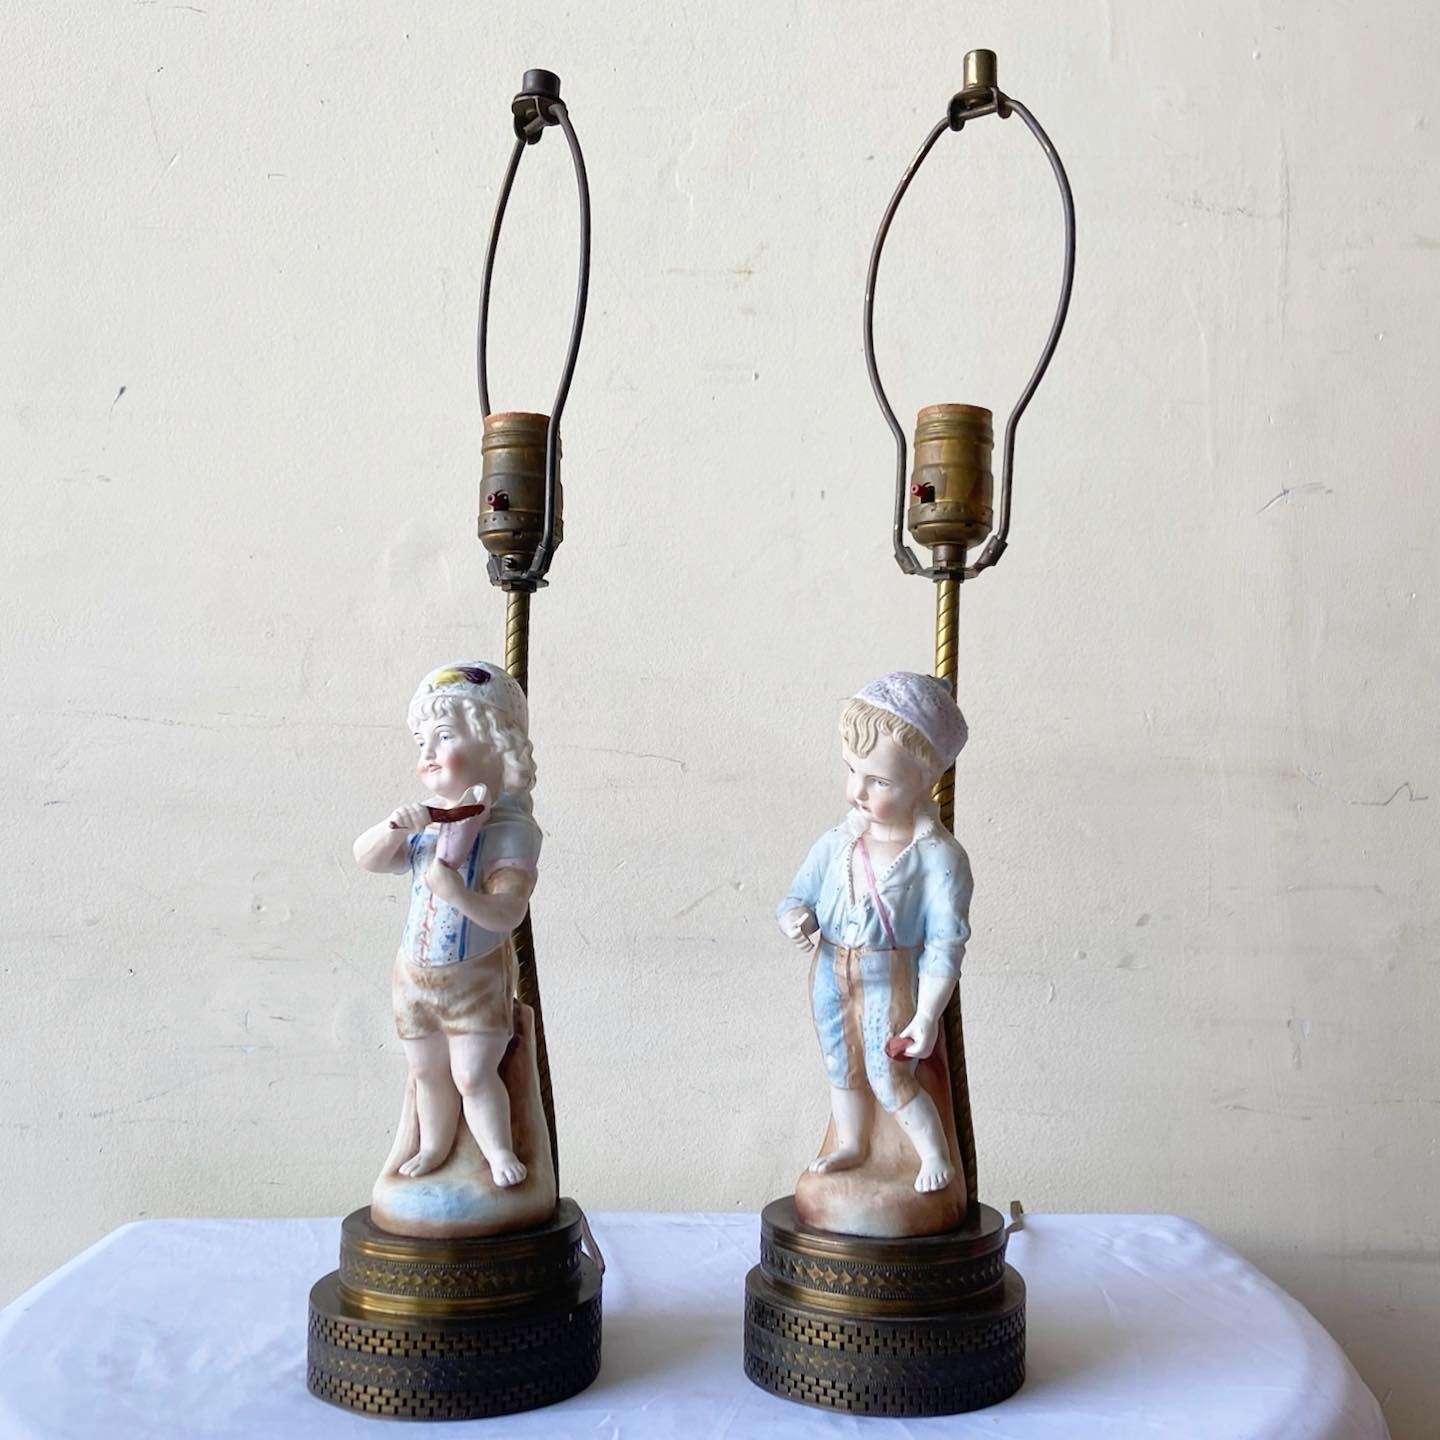 Exceptional pair of vintage ceramic table lamps. Each lamp is displaying a boy and girl with a brass base.
